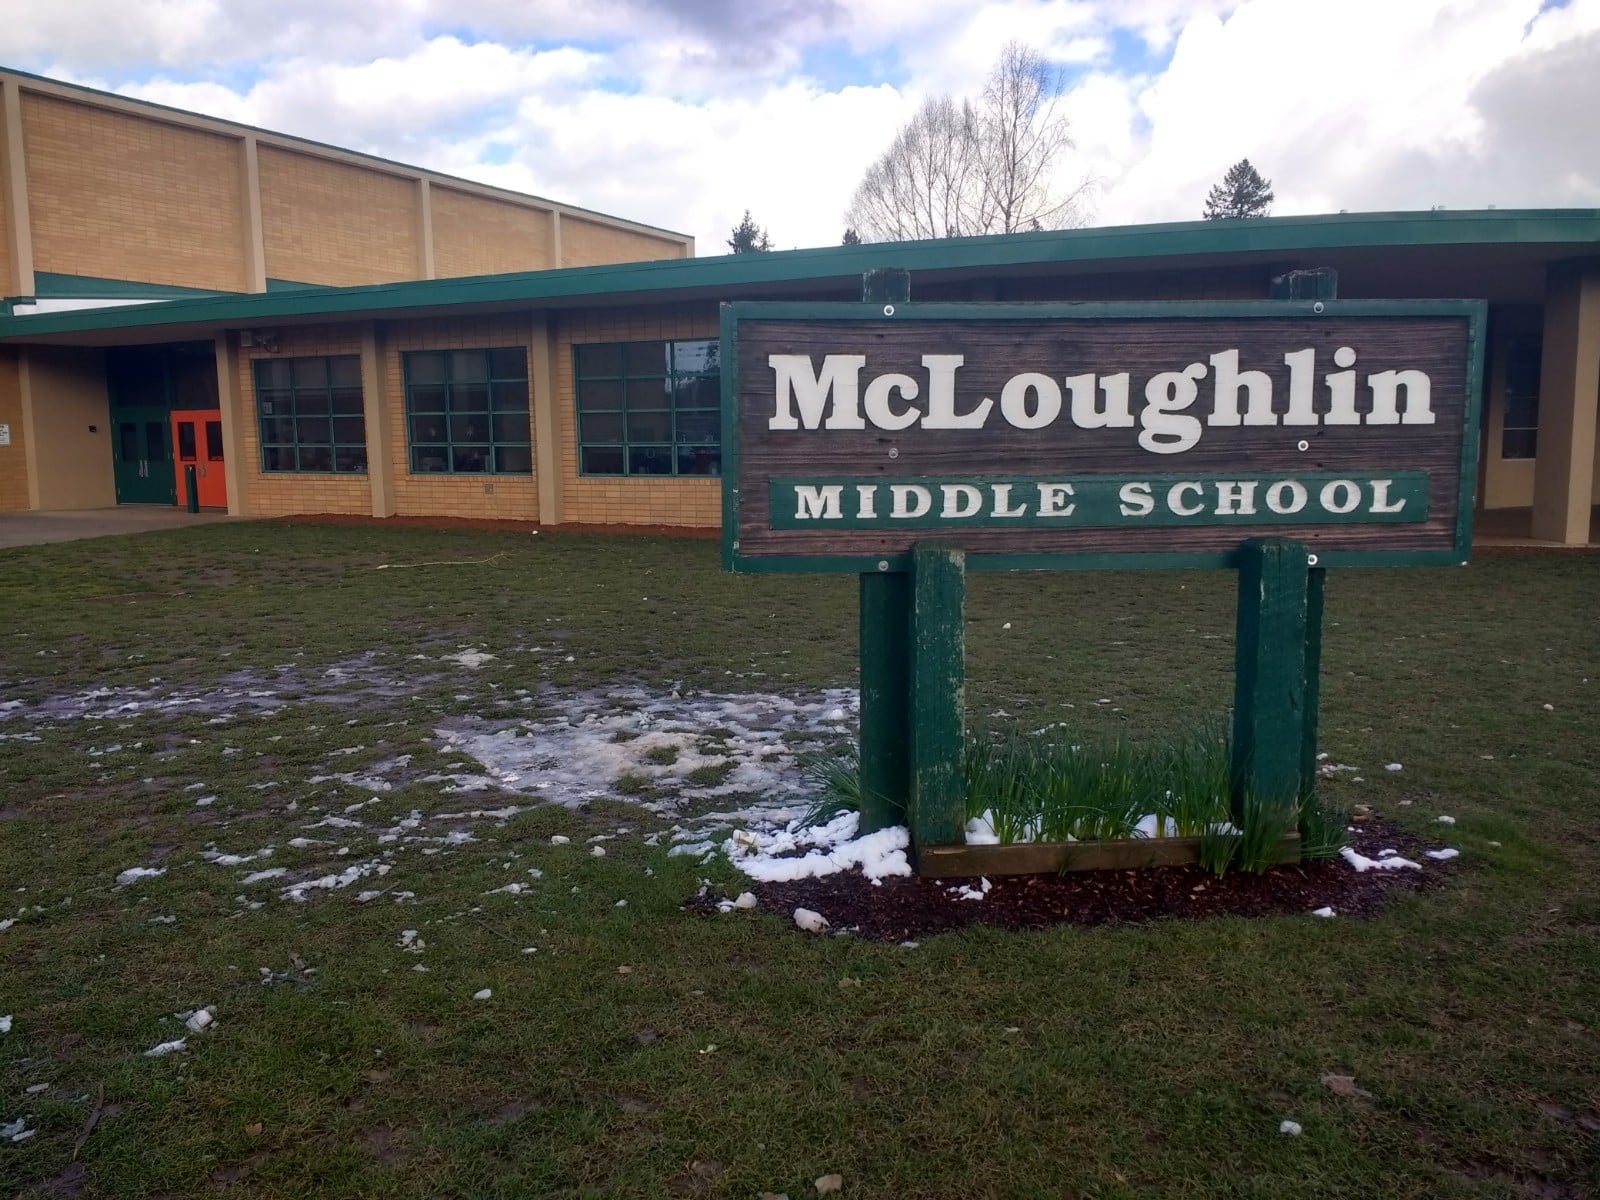 After School Arts Program Launches at McLoughlin Middle School